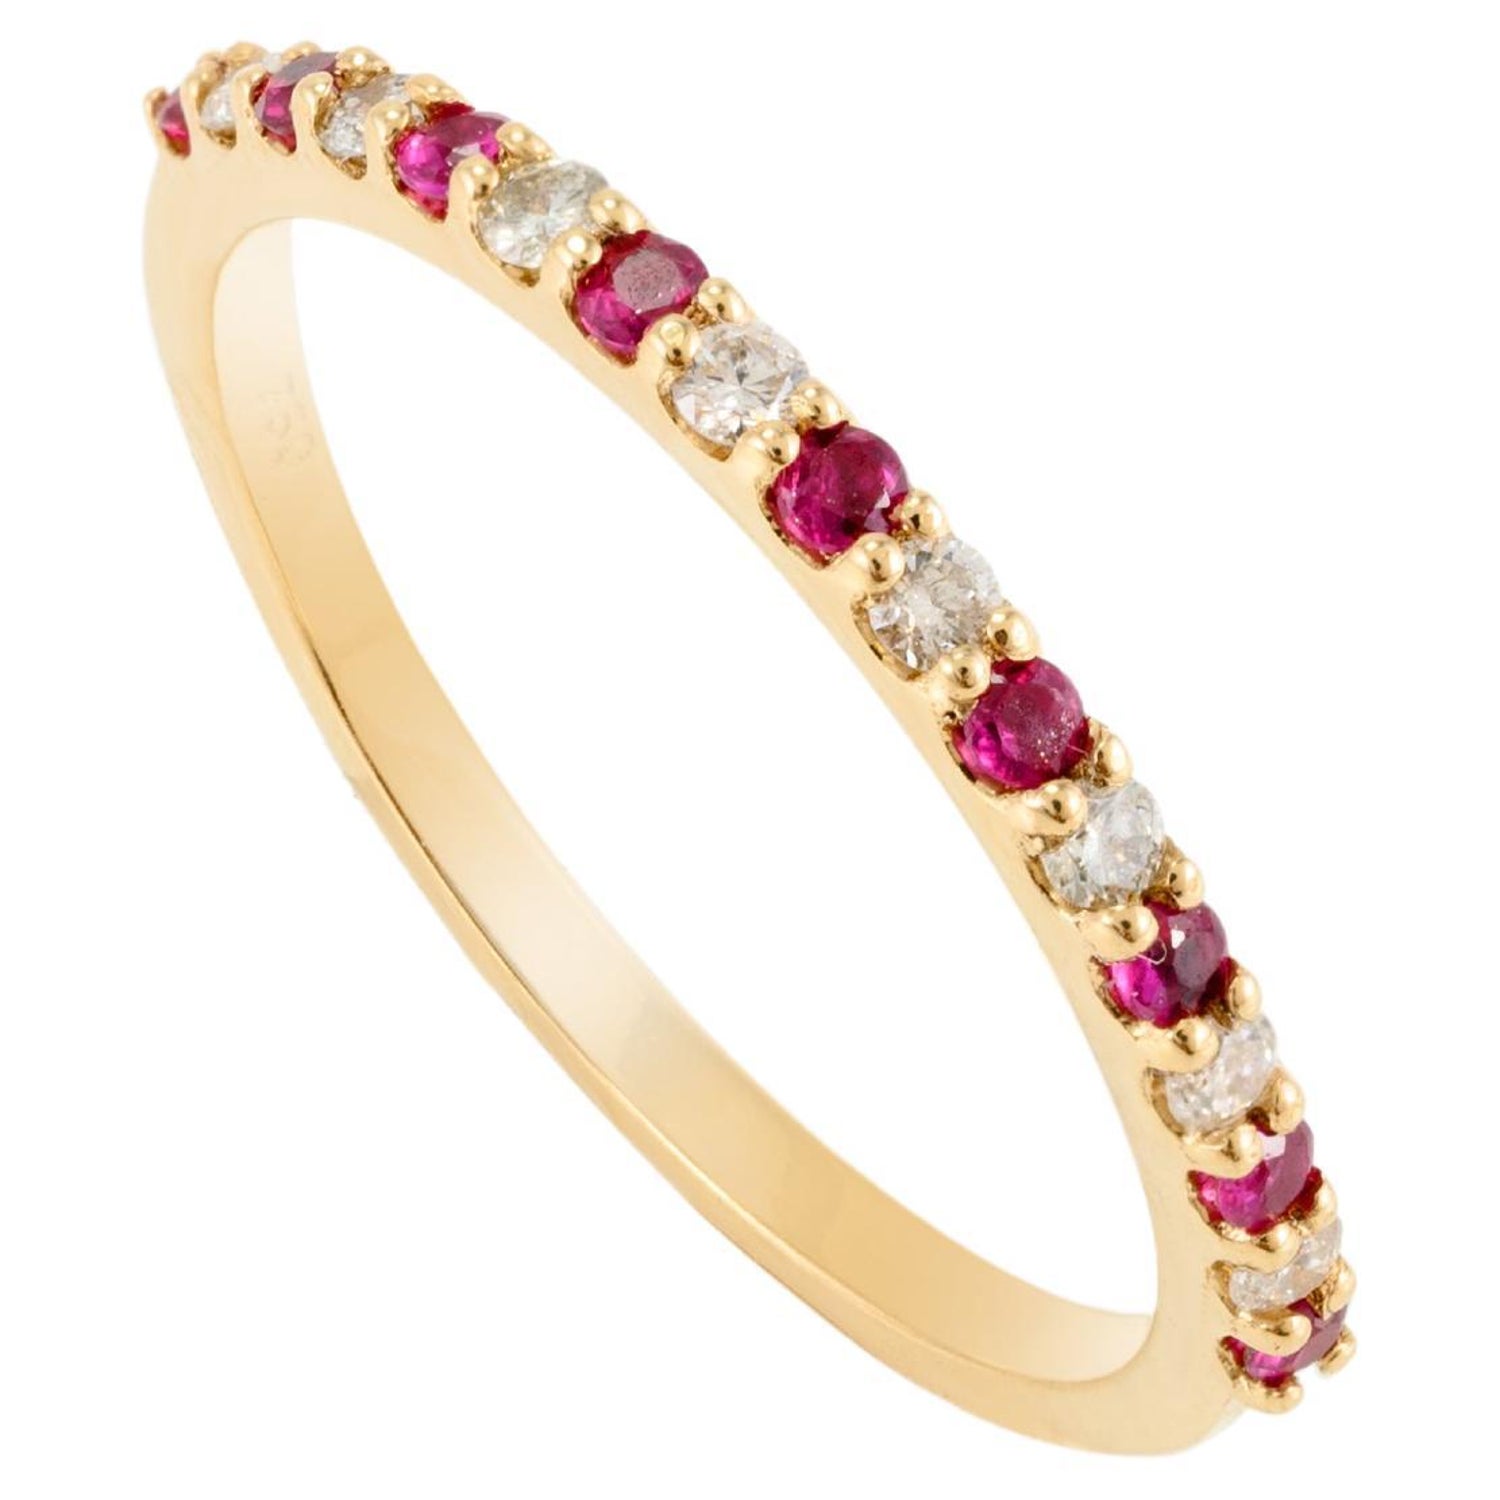 Damier Ring, Pink Gold and diamonds - Categories